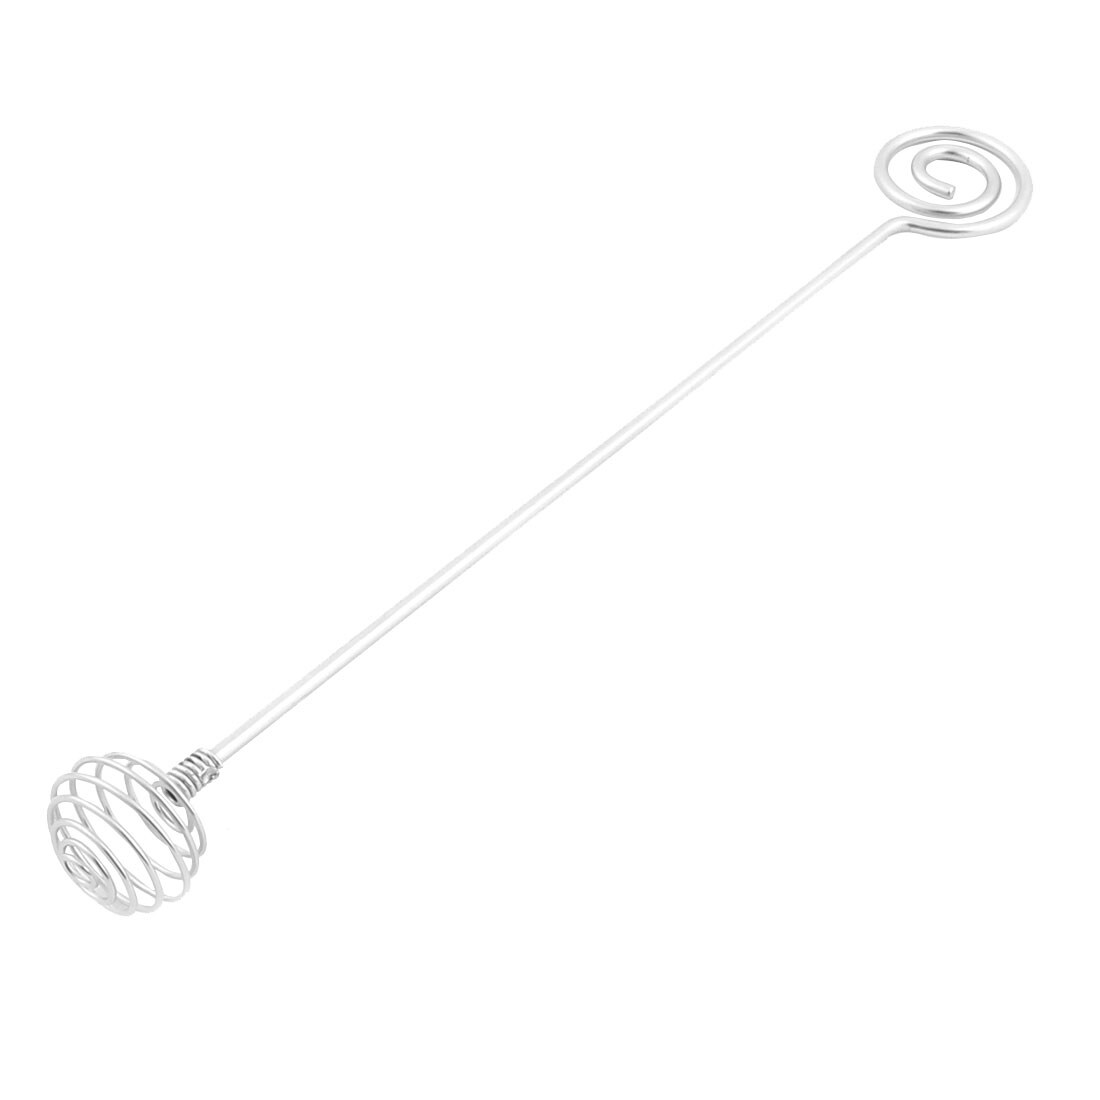 https://ak1.ostkcdn.com/images/products/is/images/direct/a4f5d9f96d81e02cbf610428840cafe37b4c00ff/Stainless-Steel-Spring-Whisk-Egg-Beater-Drink-Stir-Swizzle-Stick.jpg